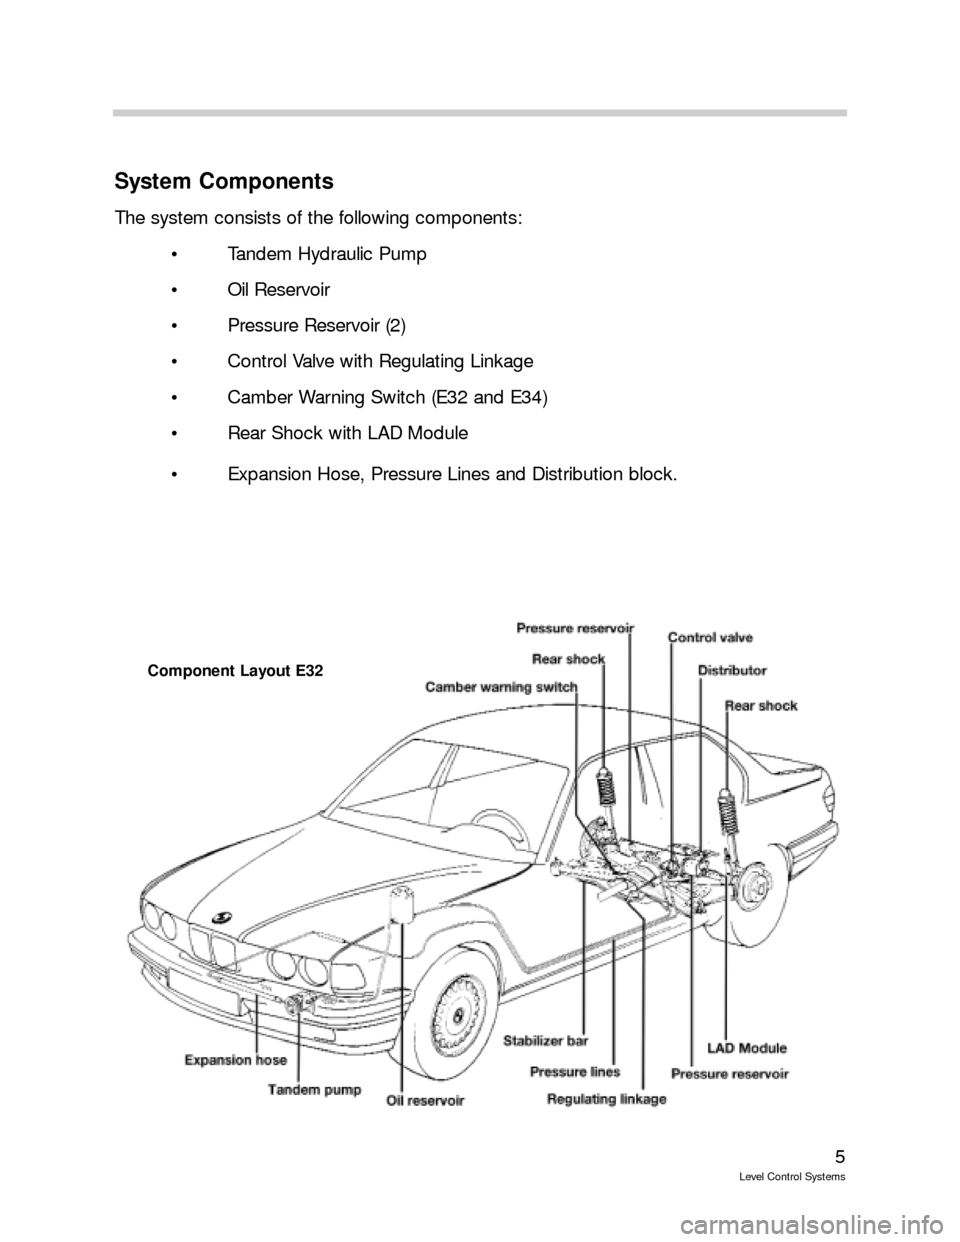 BMW 750IL 1998 E38 Level Control System Manual 5
Level Control Systems
System Components
The system consists of the following components:
 Tandem Hydraulic Pump
 Oil Reservoir
 Pressure Reservoir (2)
 Control Valve with Regulating Linkage
 Ca